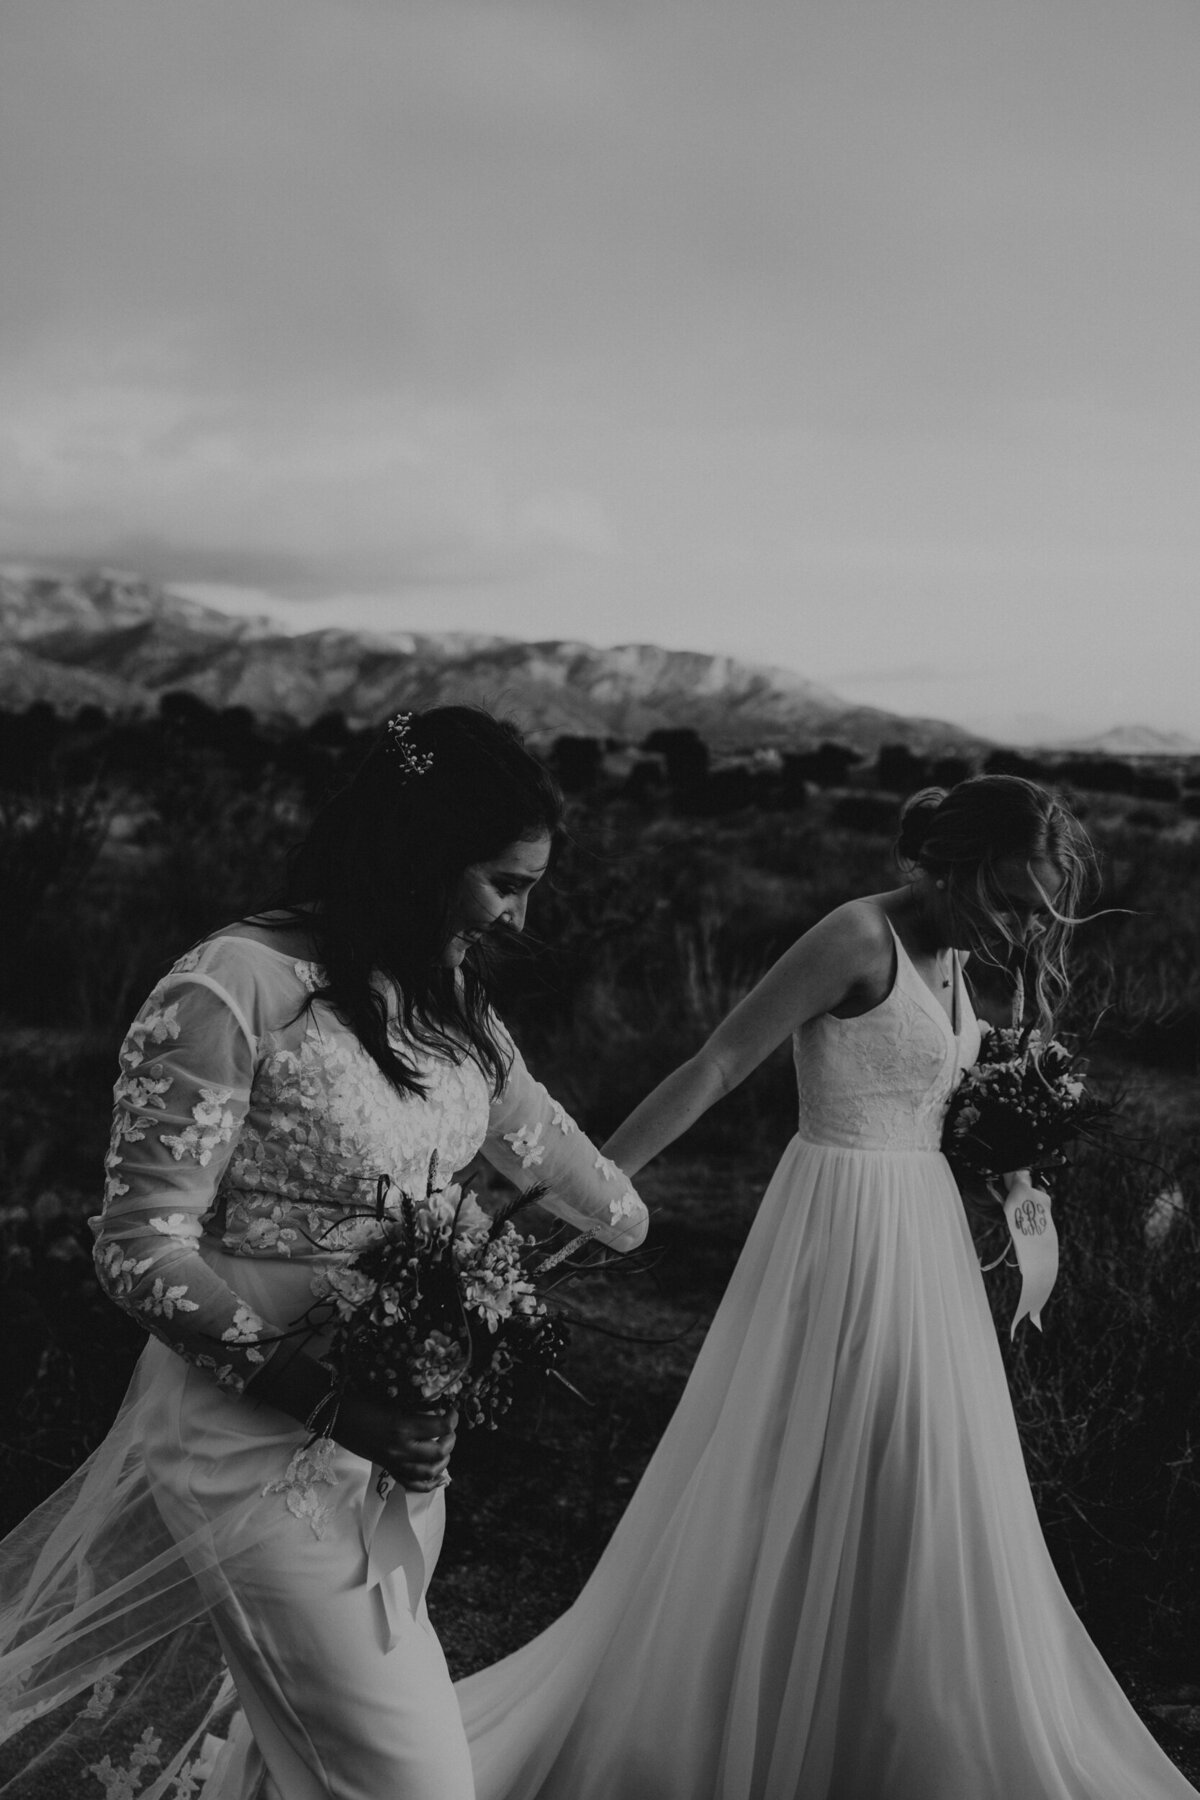 two brides walking together at the Sandia foothills in Albuquerque, New Mexico